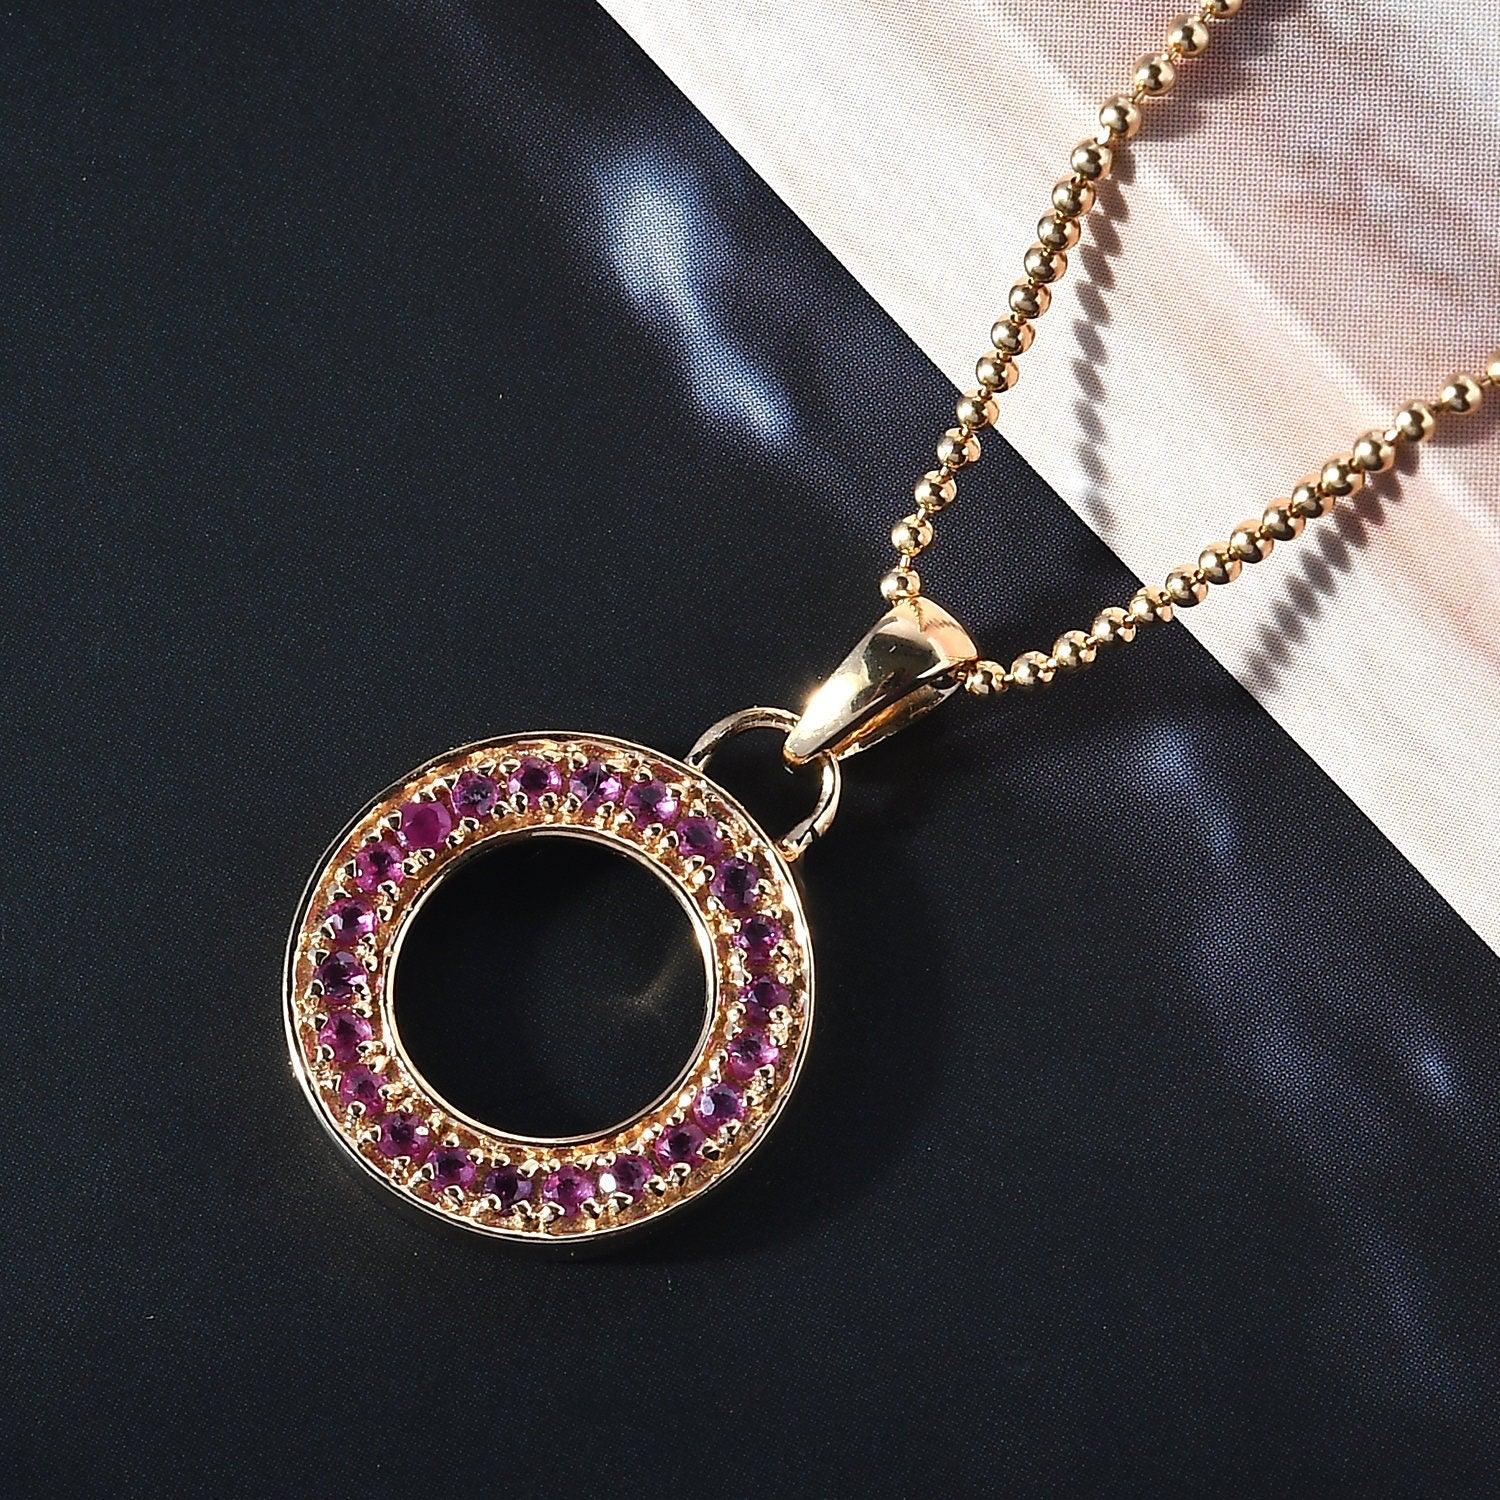 Ruby Circle Pendant, Eternity Pendant, Circle of Life Pendant in 18K Yellow Gold Plated 925 Sterling Silver, Meaningful Jewellery - Inspiring Jewellery